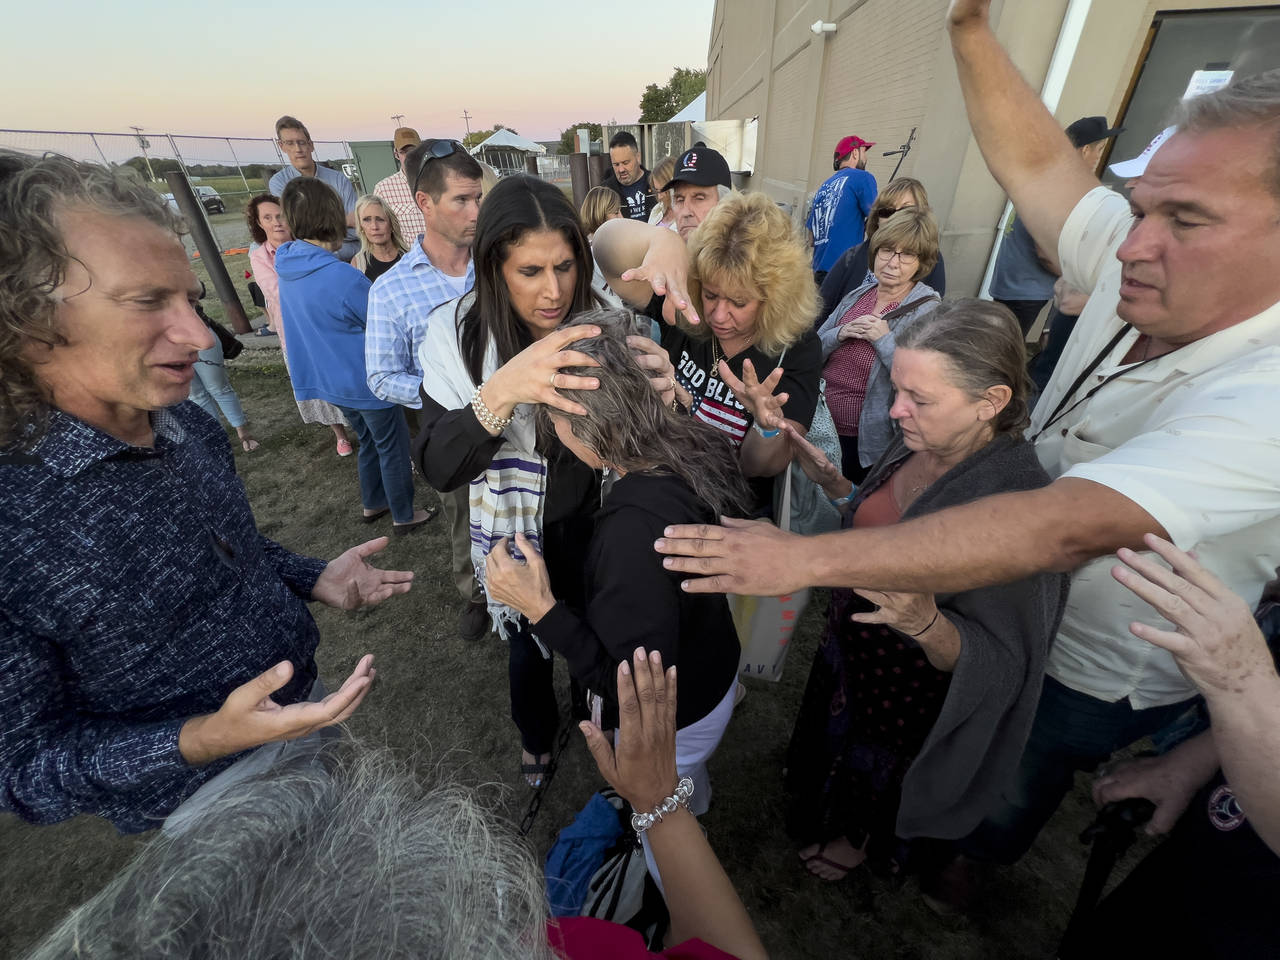 Amanda Grace of Ark of Grace Ministries and a group of people gather in prayer around a woman for t...